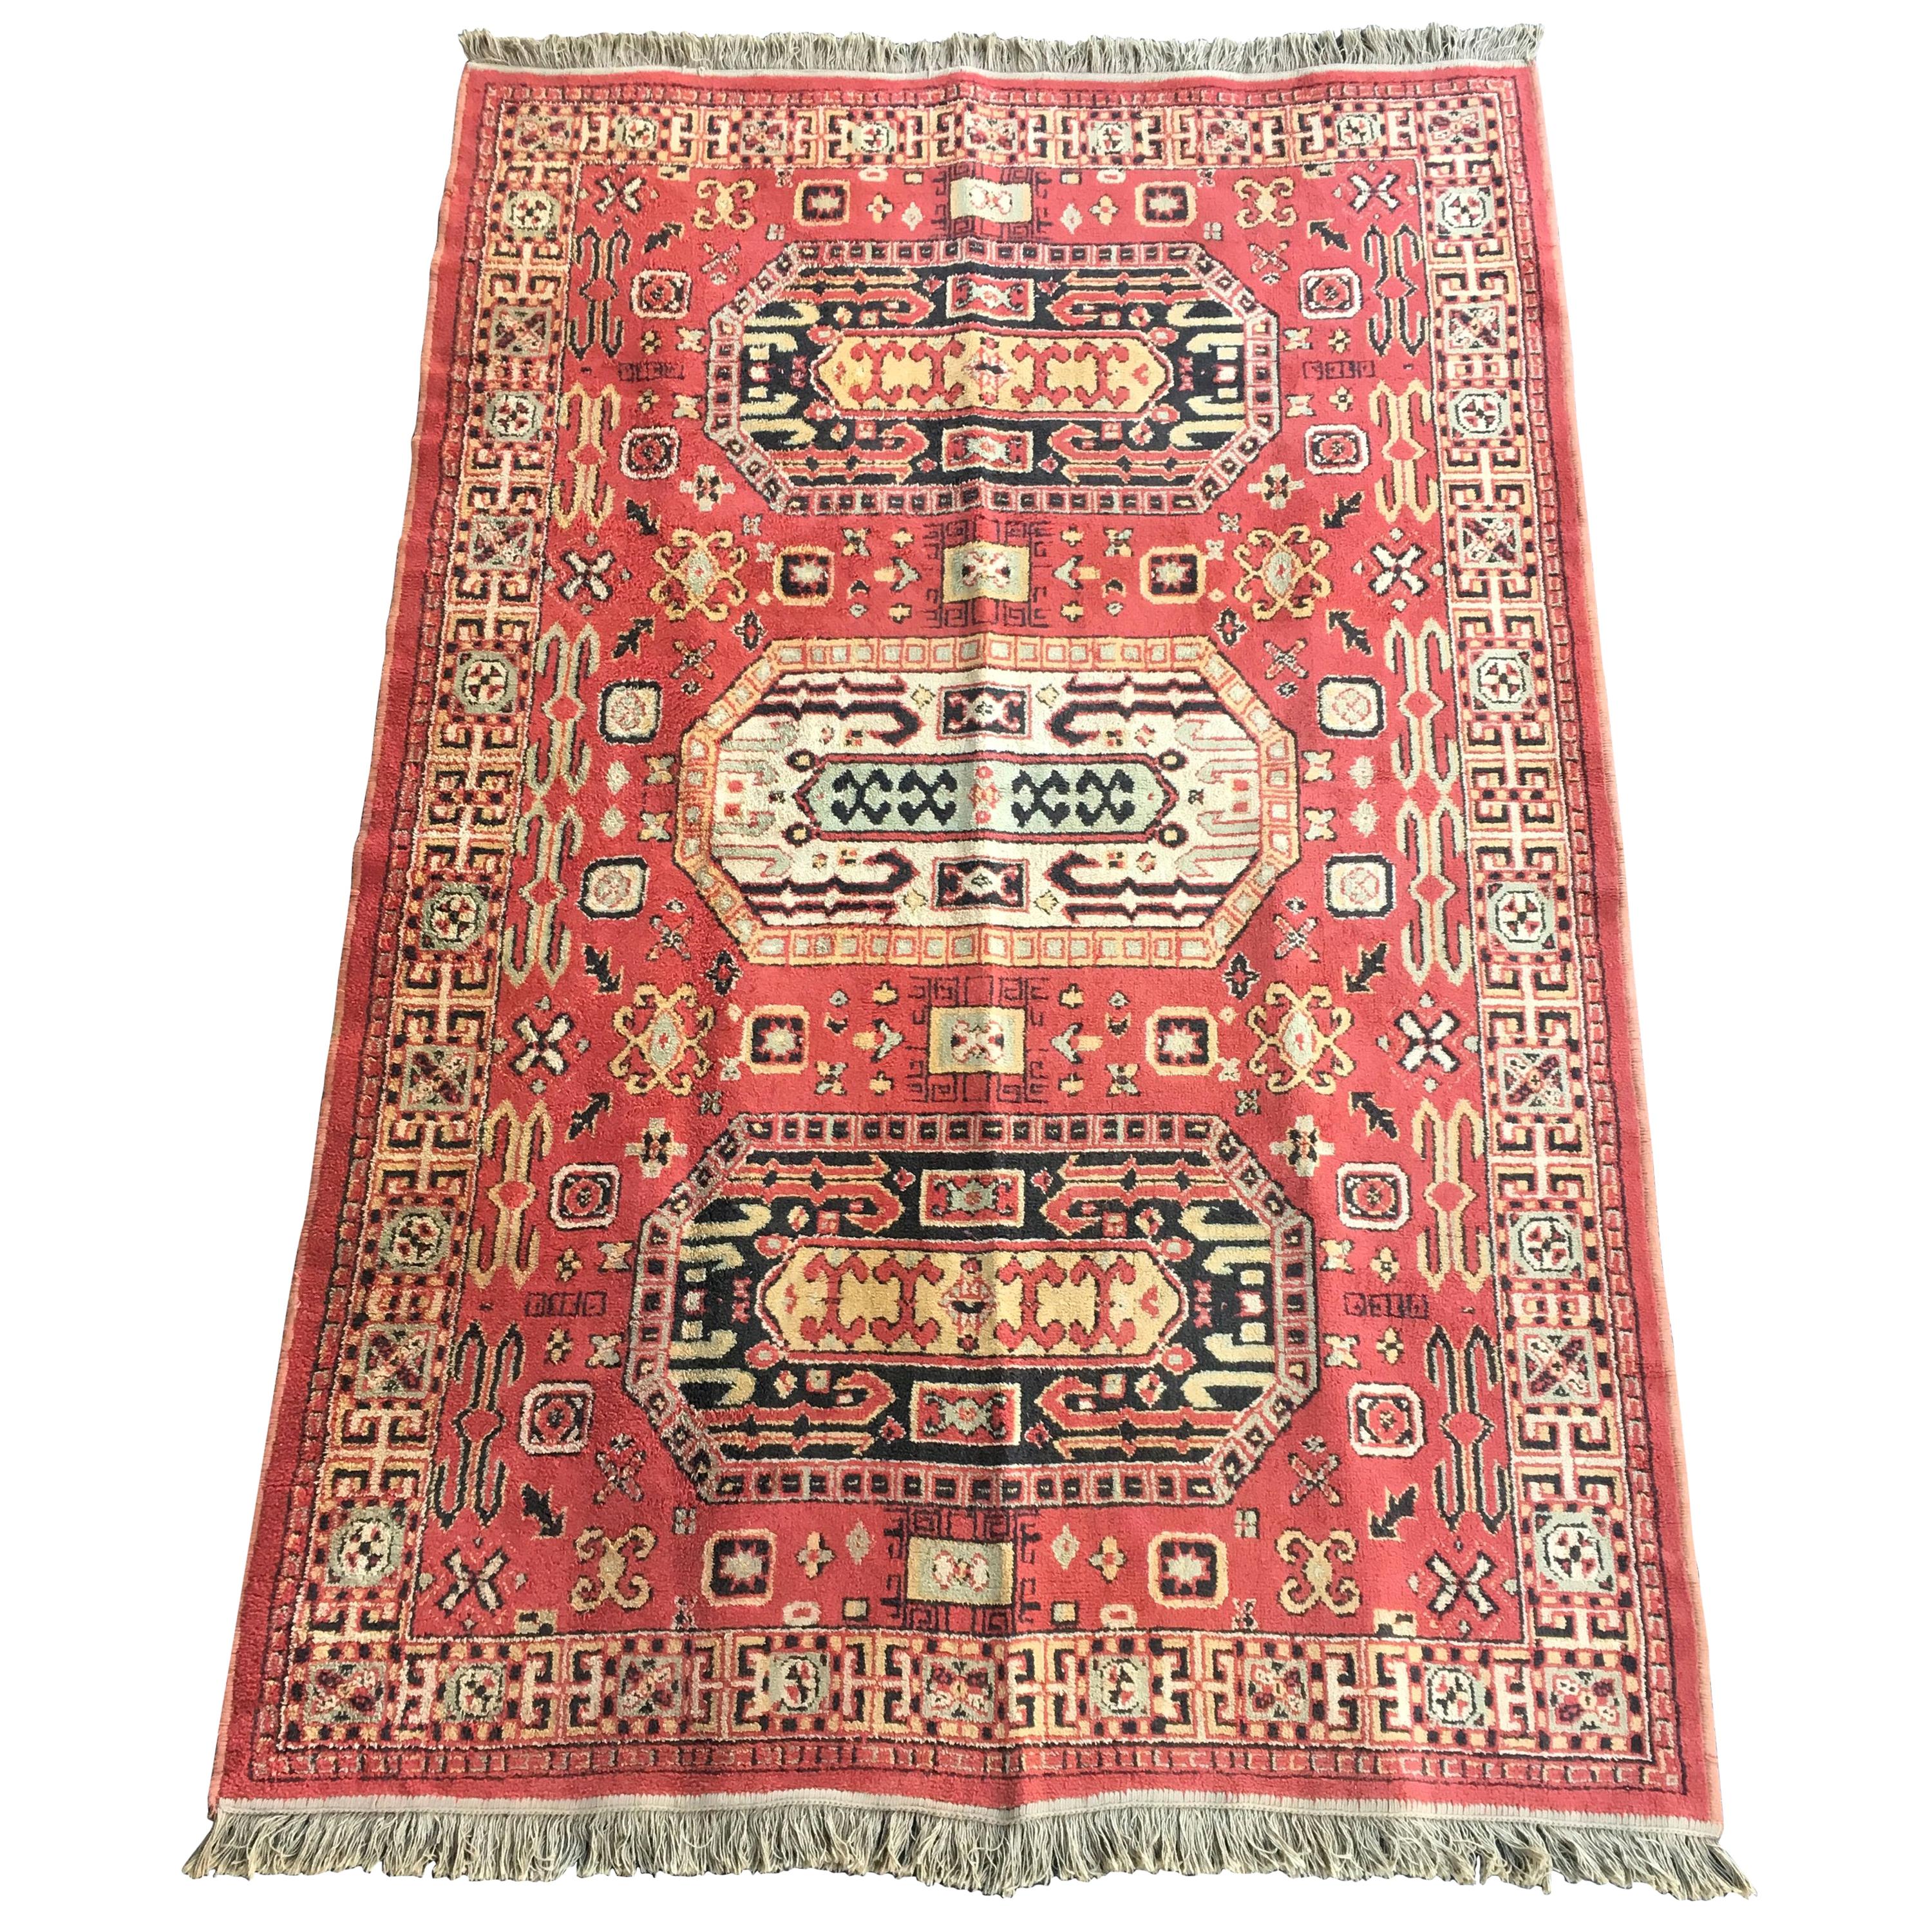 Multicolored Hand Knotted Semi-Antique Rug, Turkish 